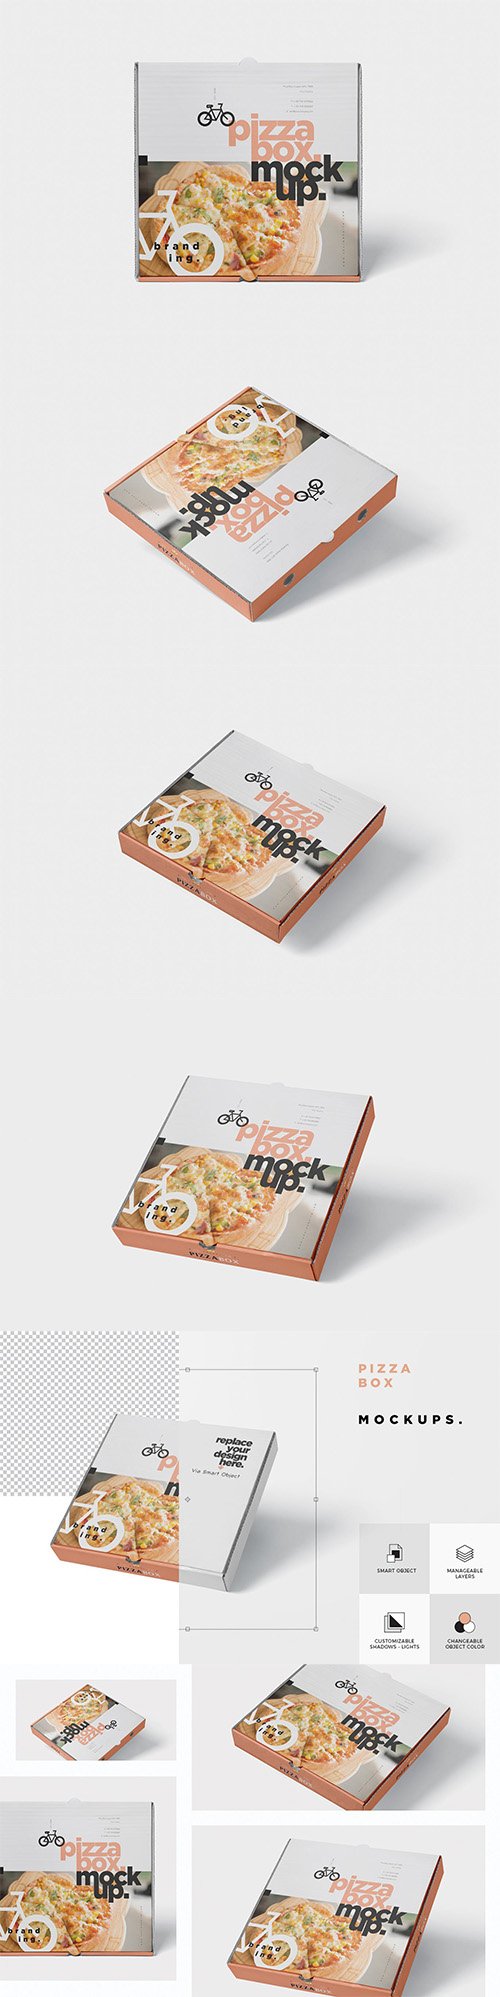 Pizza Box Mock-Up - Grocery Store Edition PSD